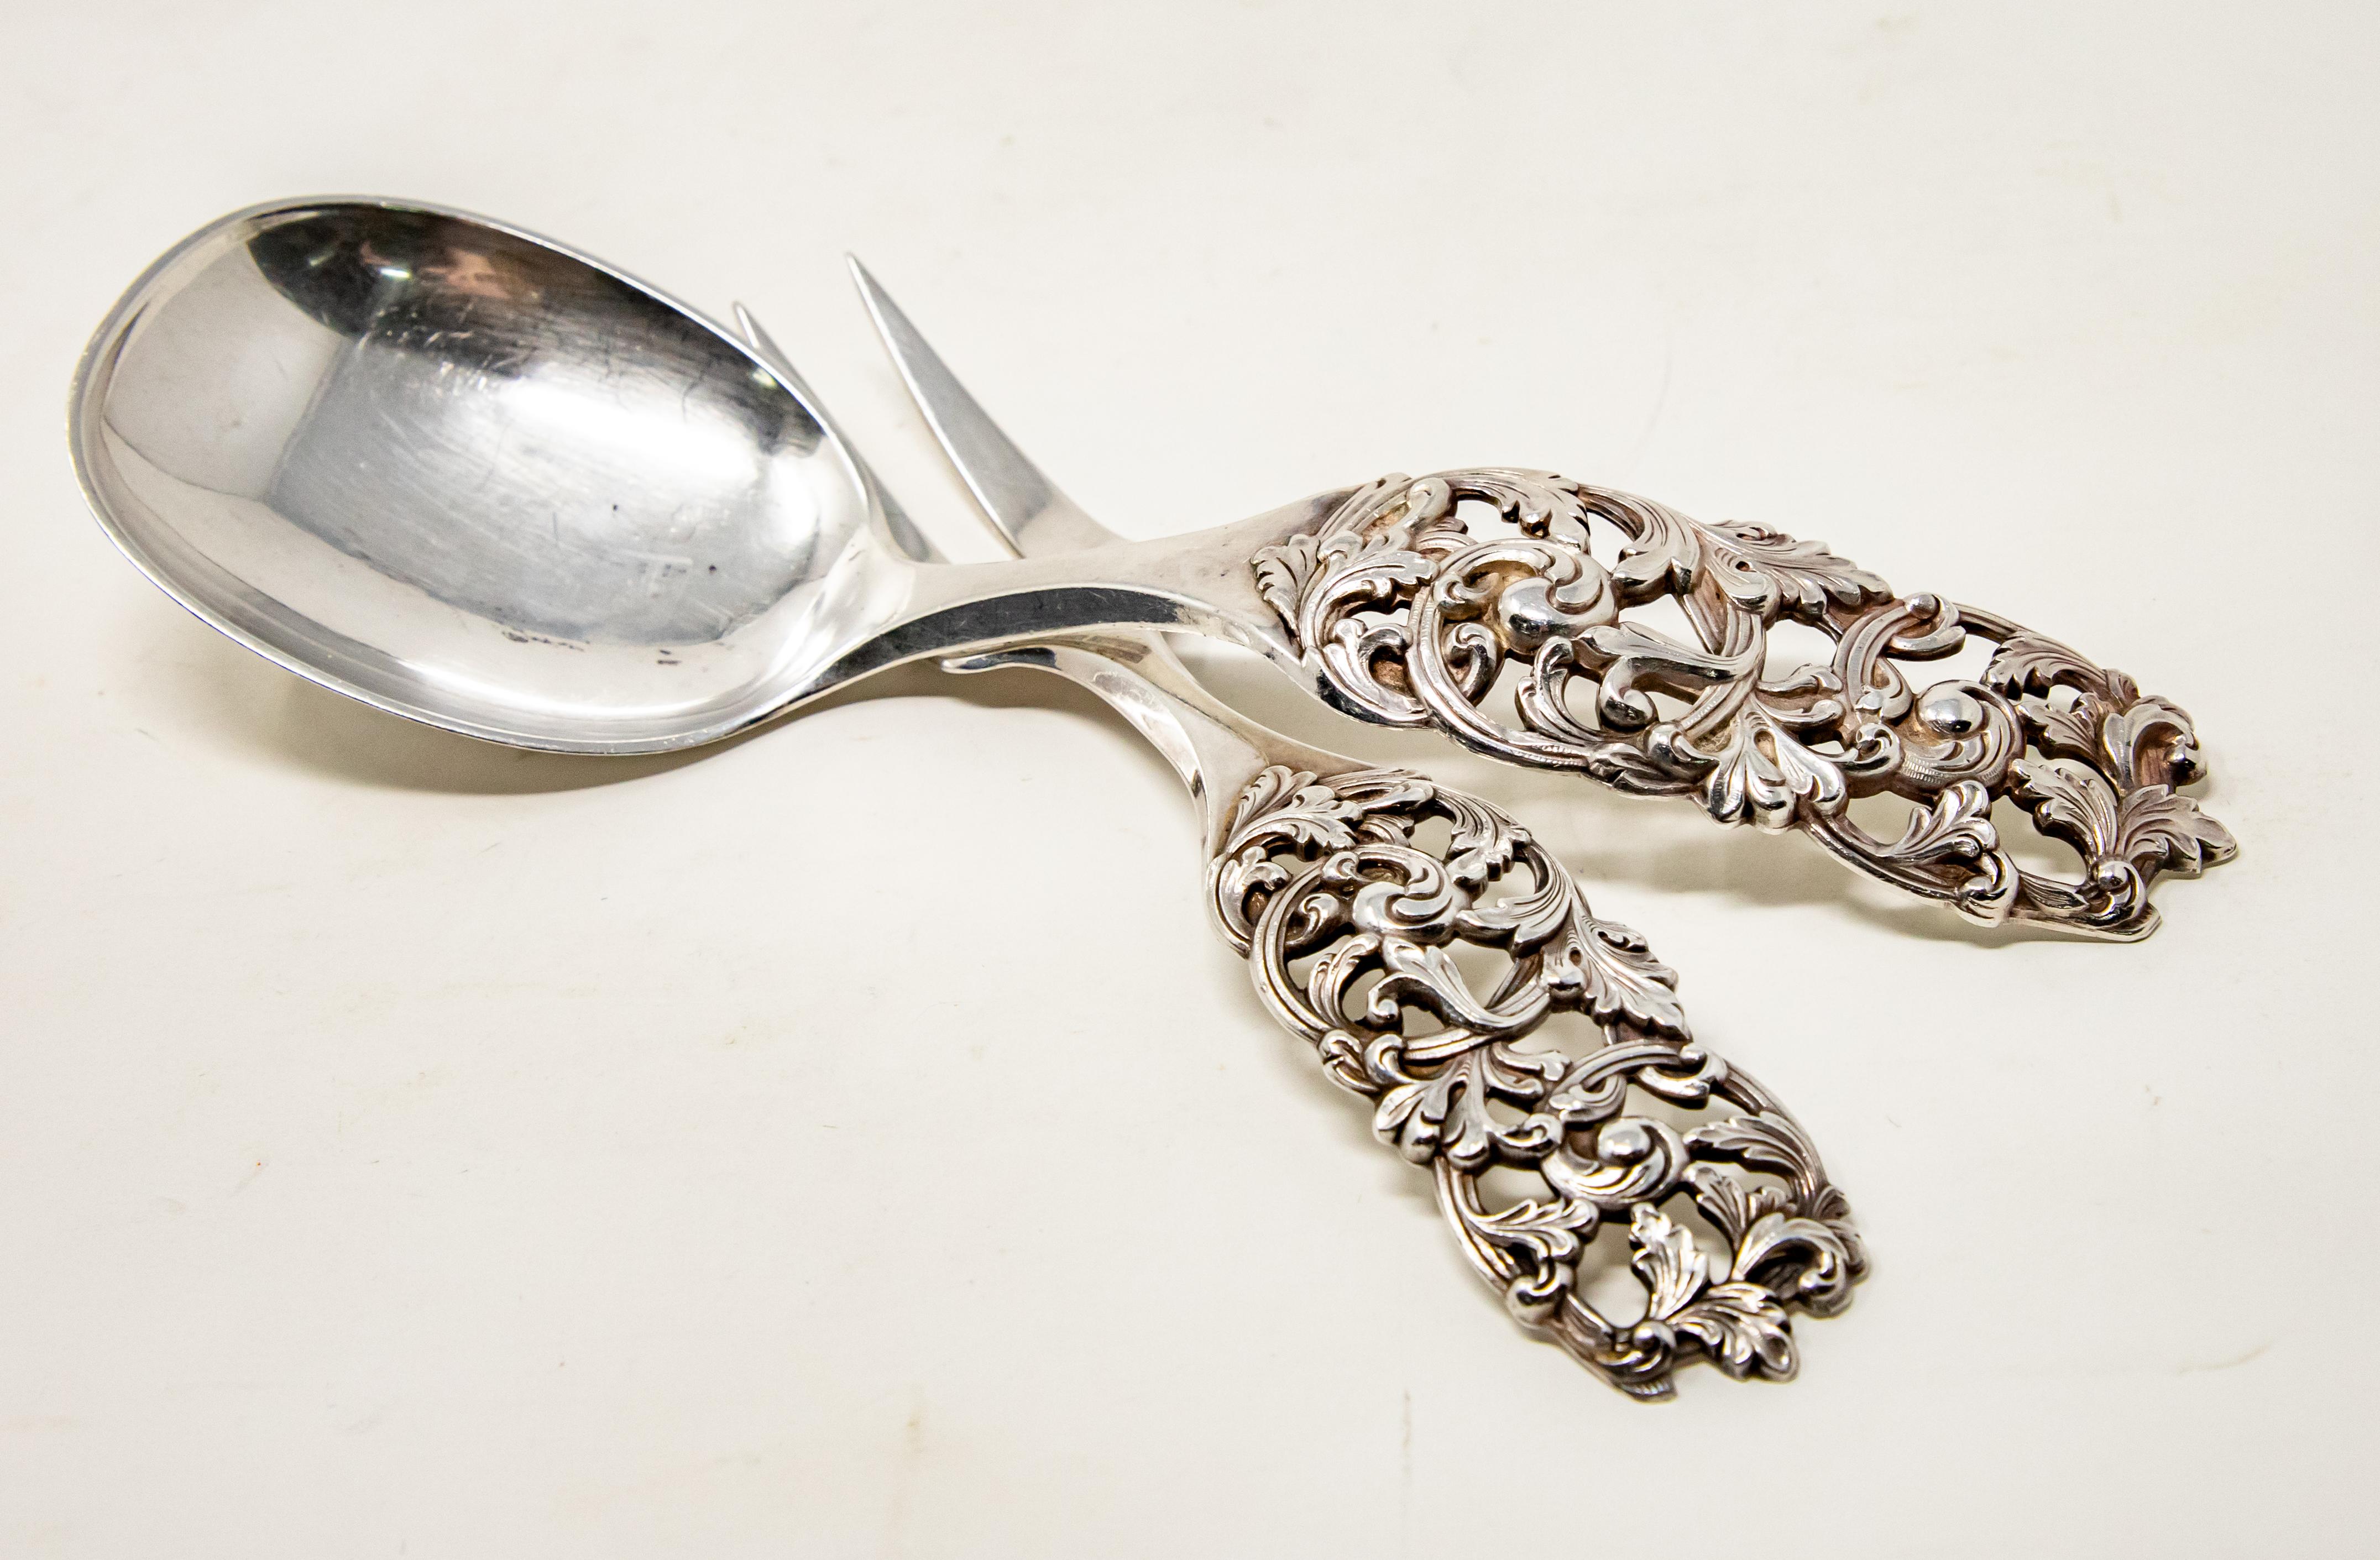 Offering this set of R. Elveseter sterling silver salad cutlery. Having ornate scrollwork and openwork detail on the handles. Both are hallmarked on the back of handles.